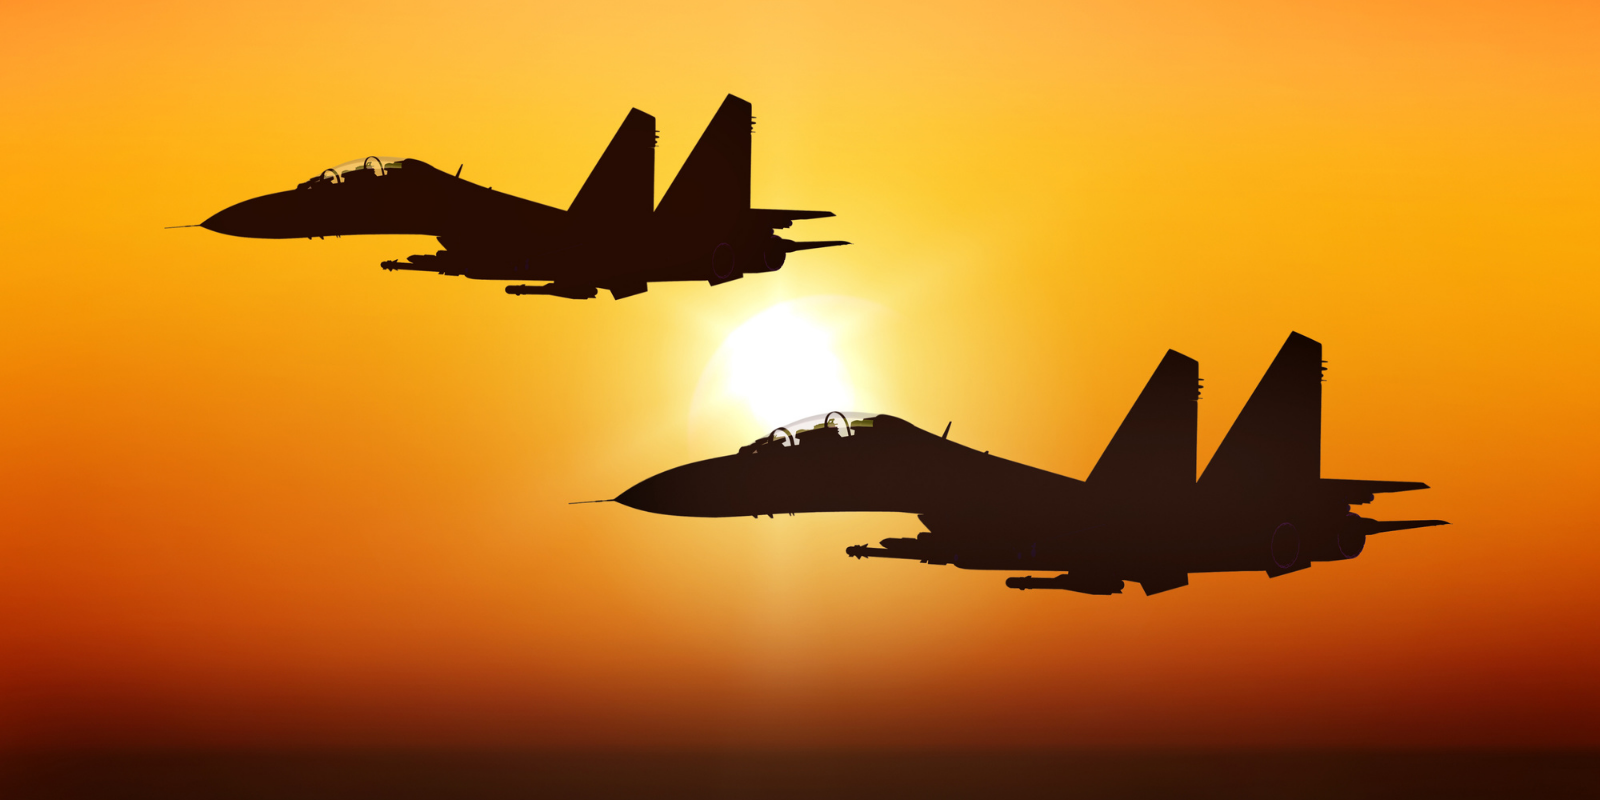 AI fighter - two fighter jets in silhouette flying alongside each other with sun in background